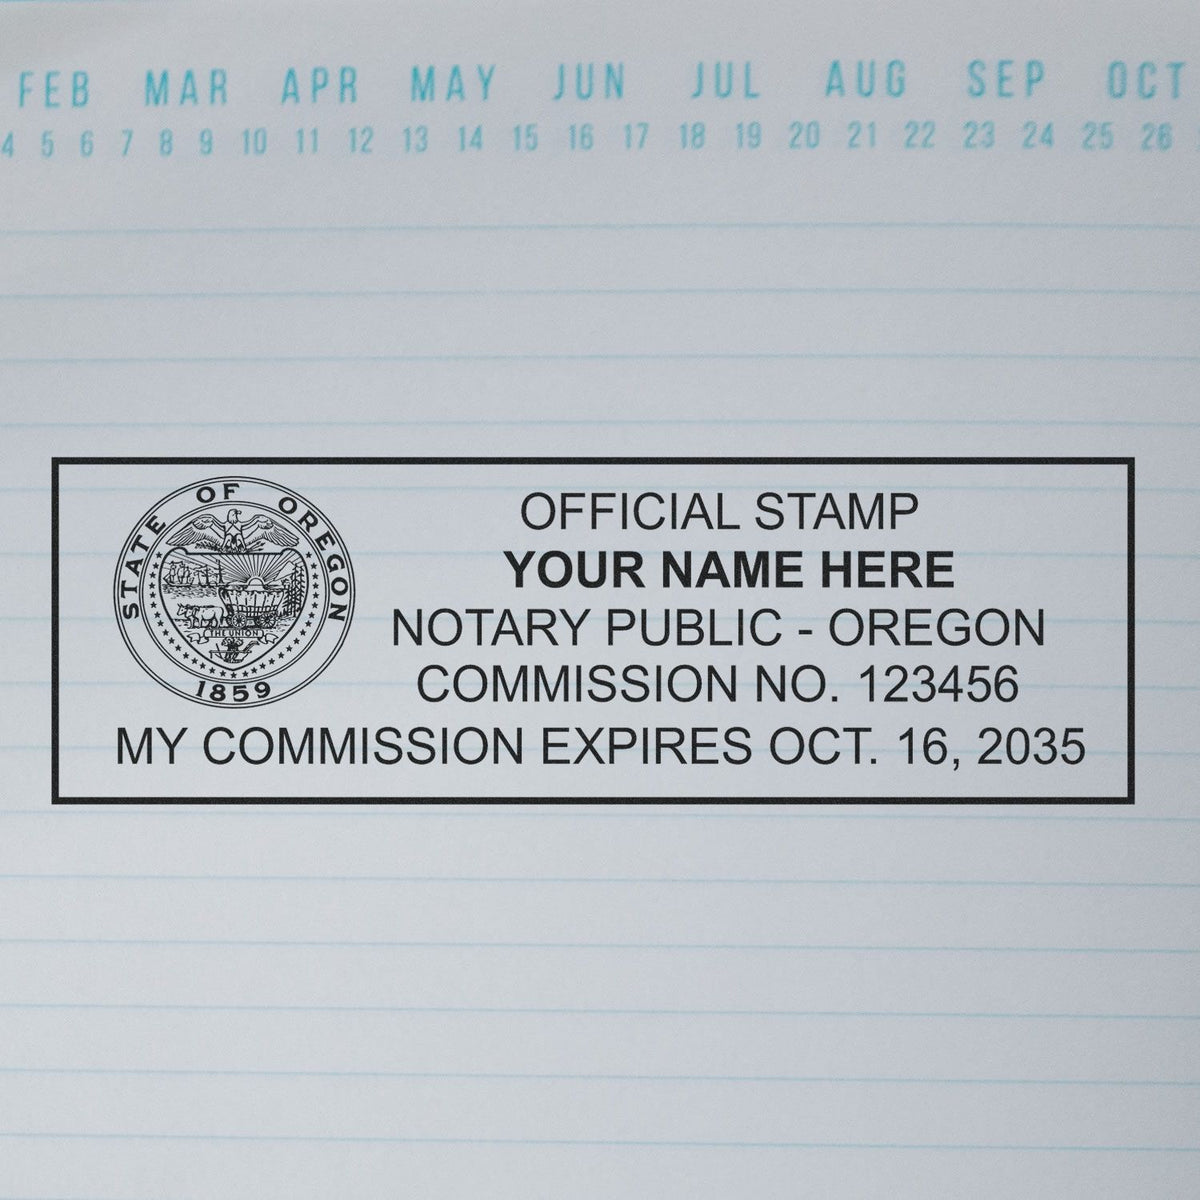 This paper is stamped with a sample imprint of the Slim Pre-Inked Rectangular Notary Stamp for Oregon, signifying its quality and reliability.